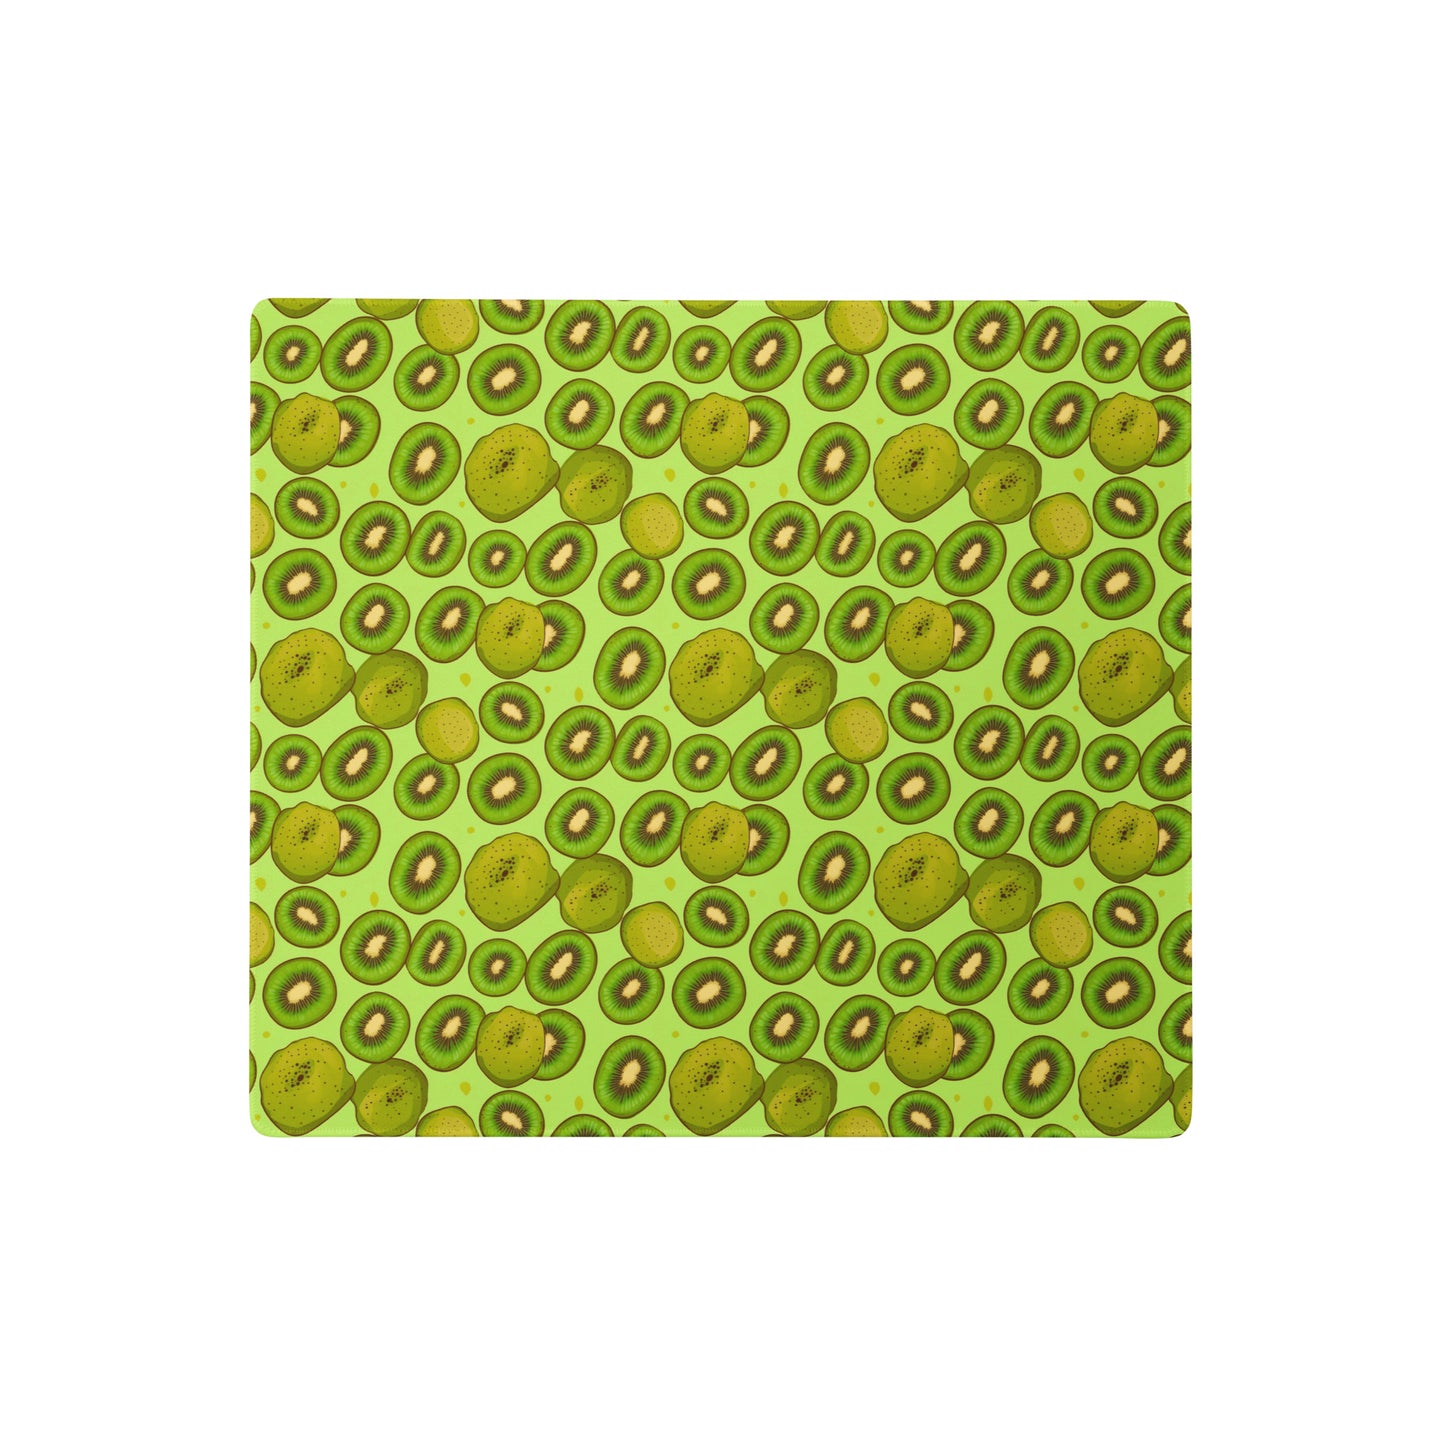 A 18" x 16" desk pad with Kiwis all over it. Green in color.